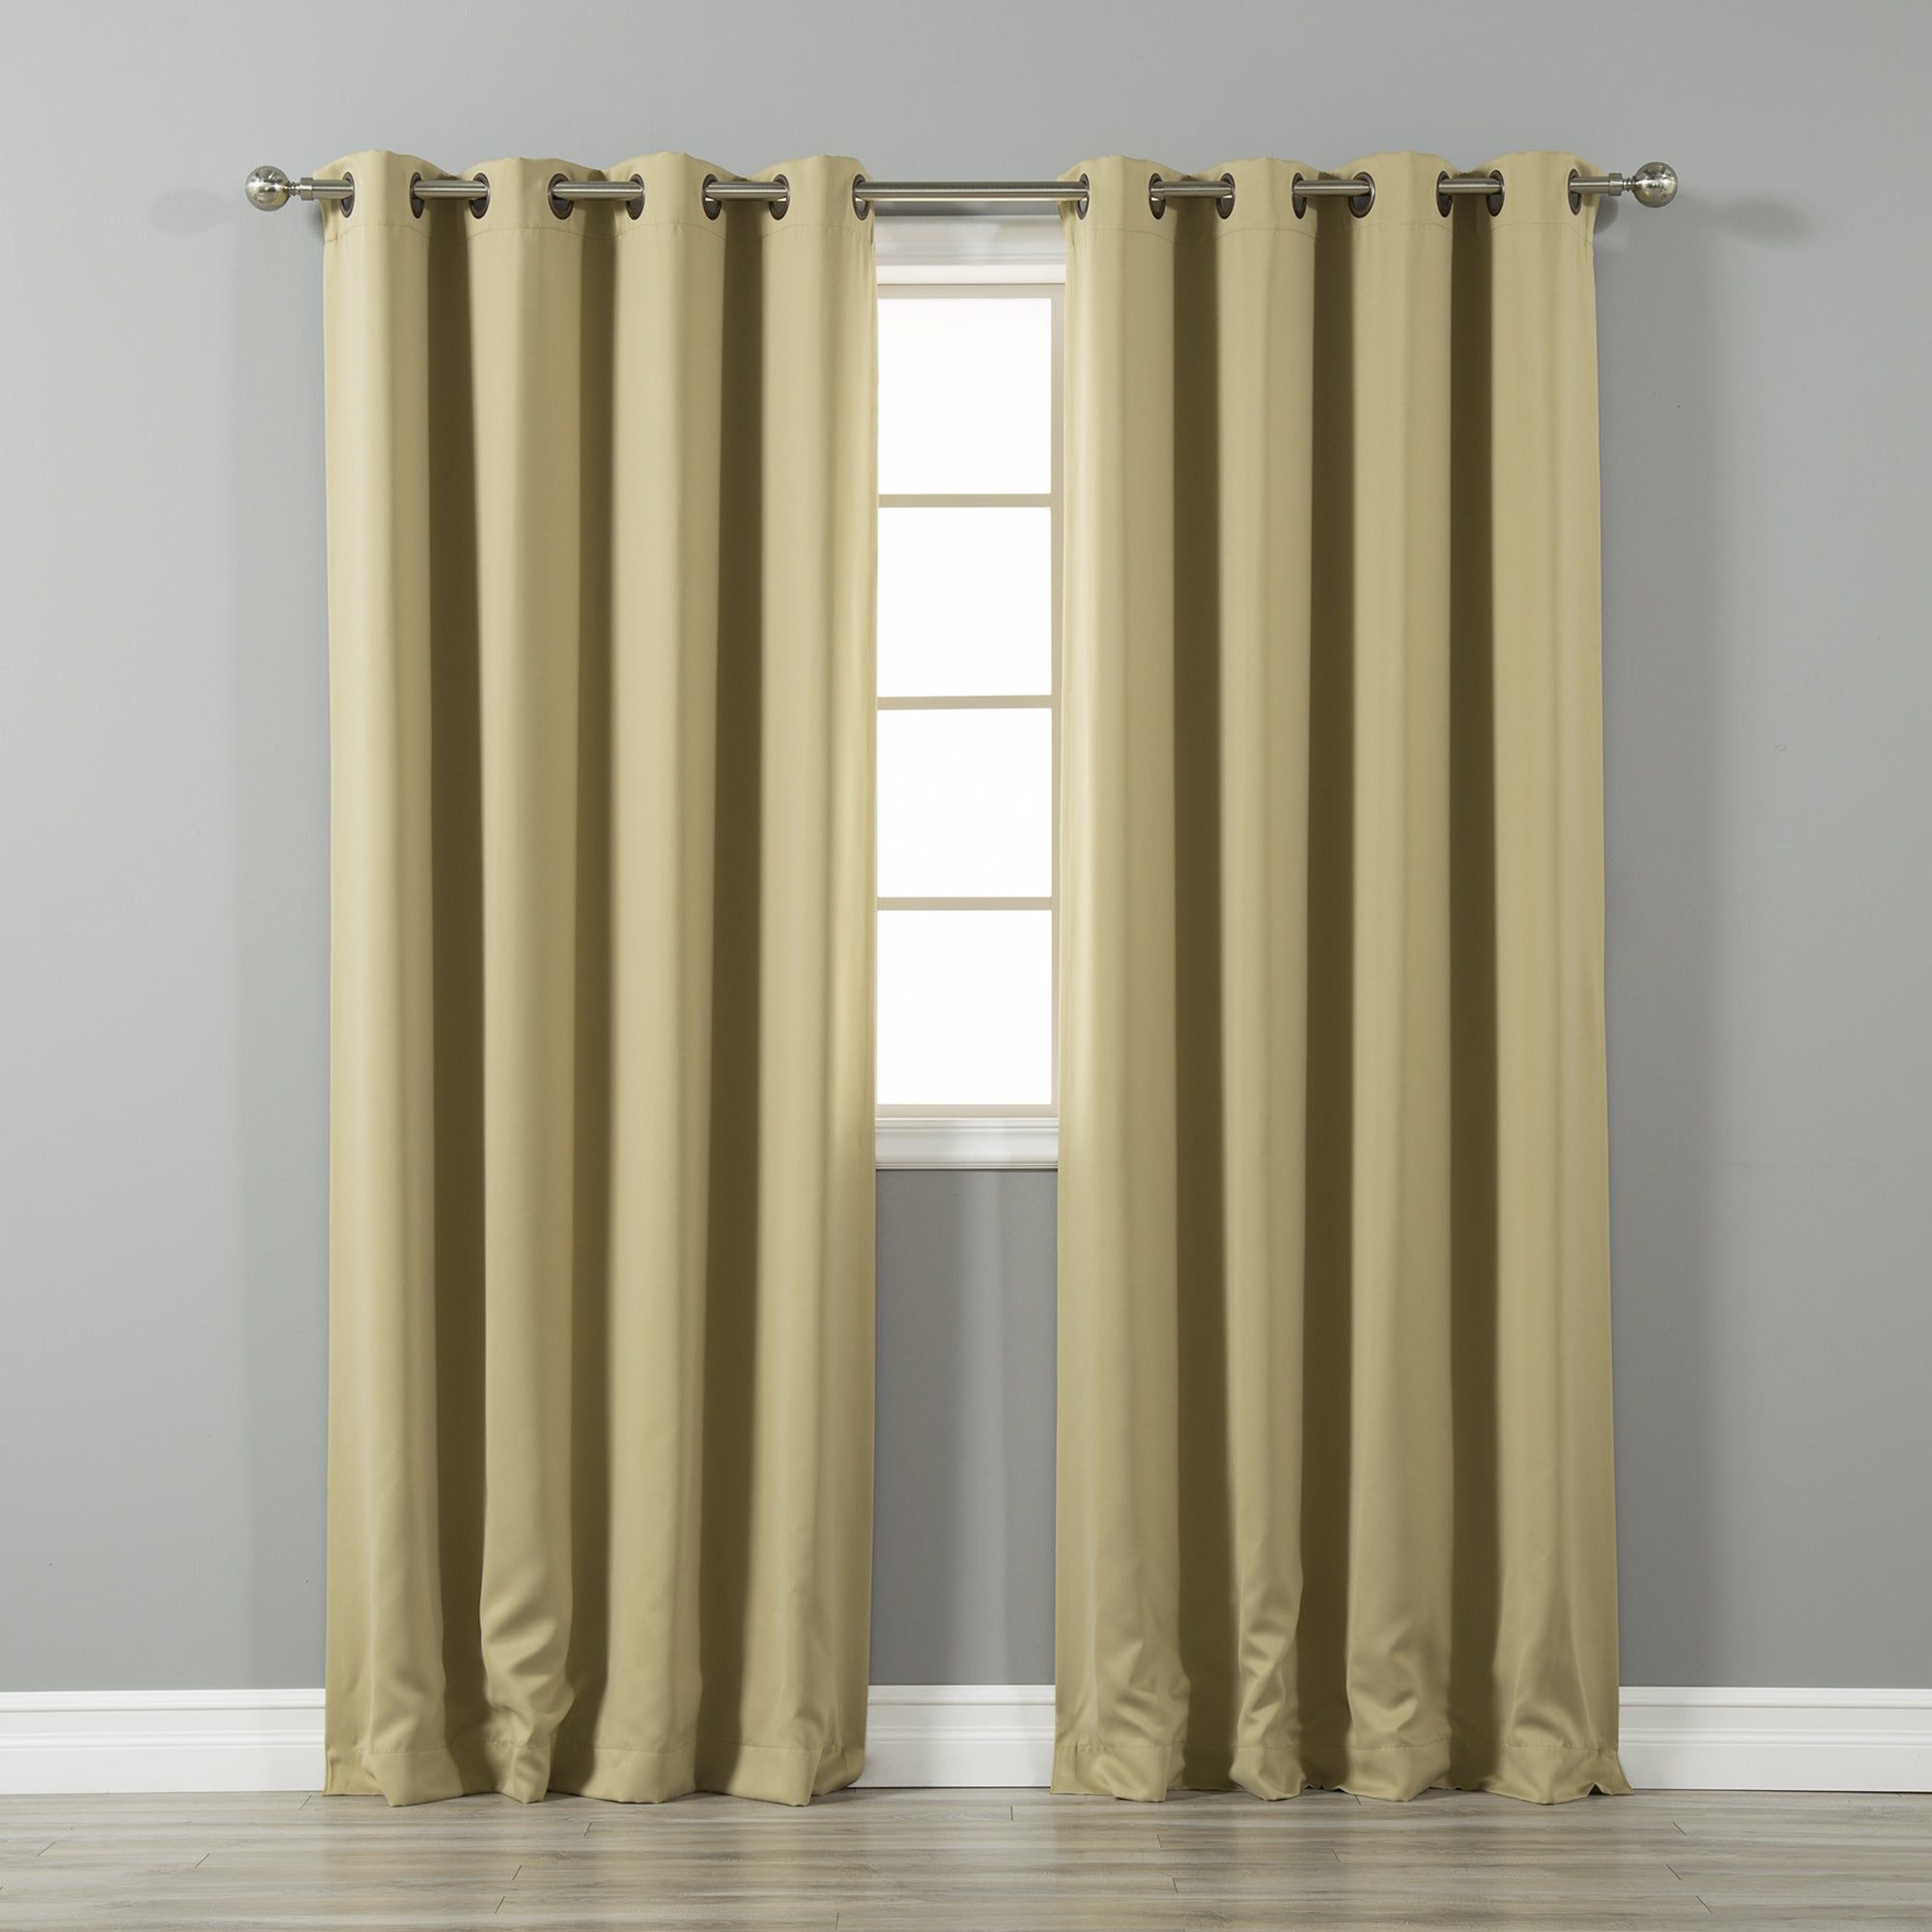 Aurora Home Thermal Insulated Blackout Grommet Top 84 Inch Curtain Panel  Pair – 52 X 84 For Grommet Top Thermal Insulated Blackout Curtain Panel Pairs (View 15 of 20)